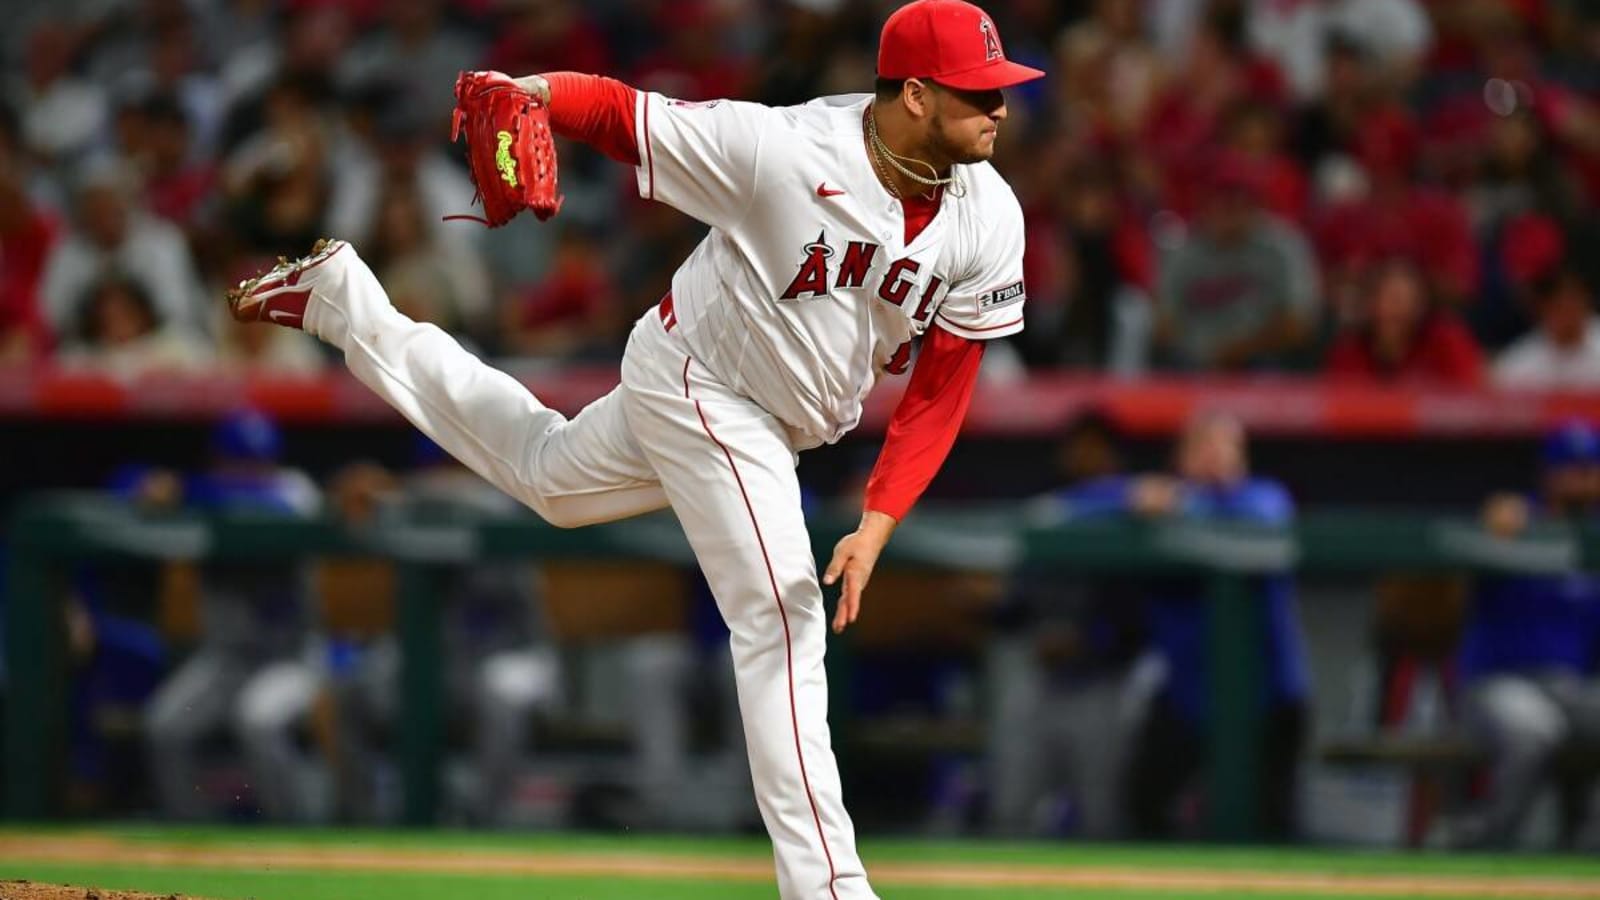 Injured Angels Reliever Hoping to Return This Season